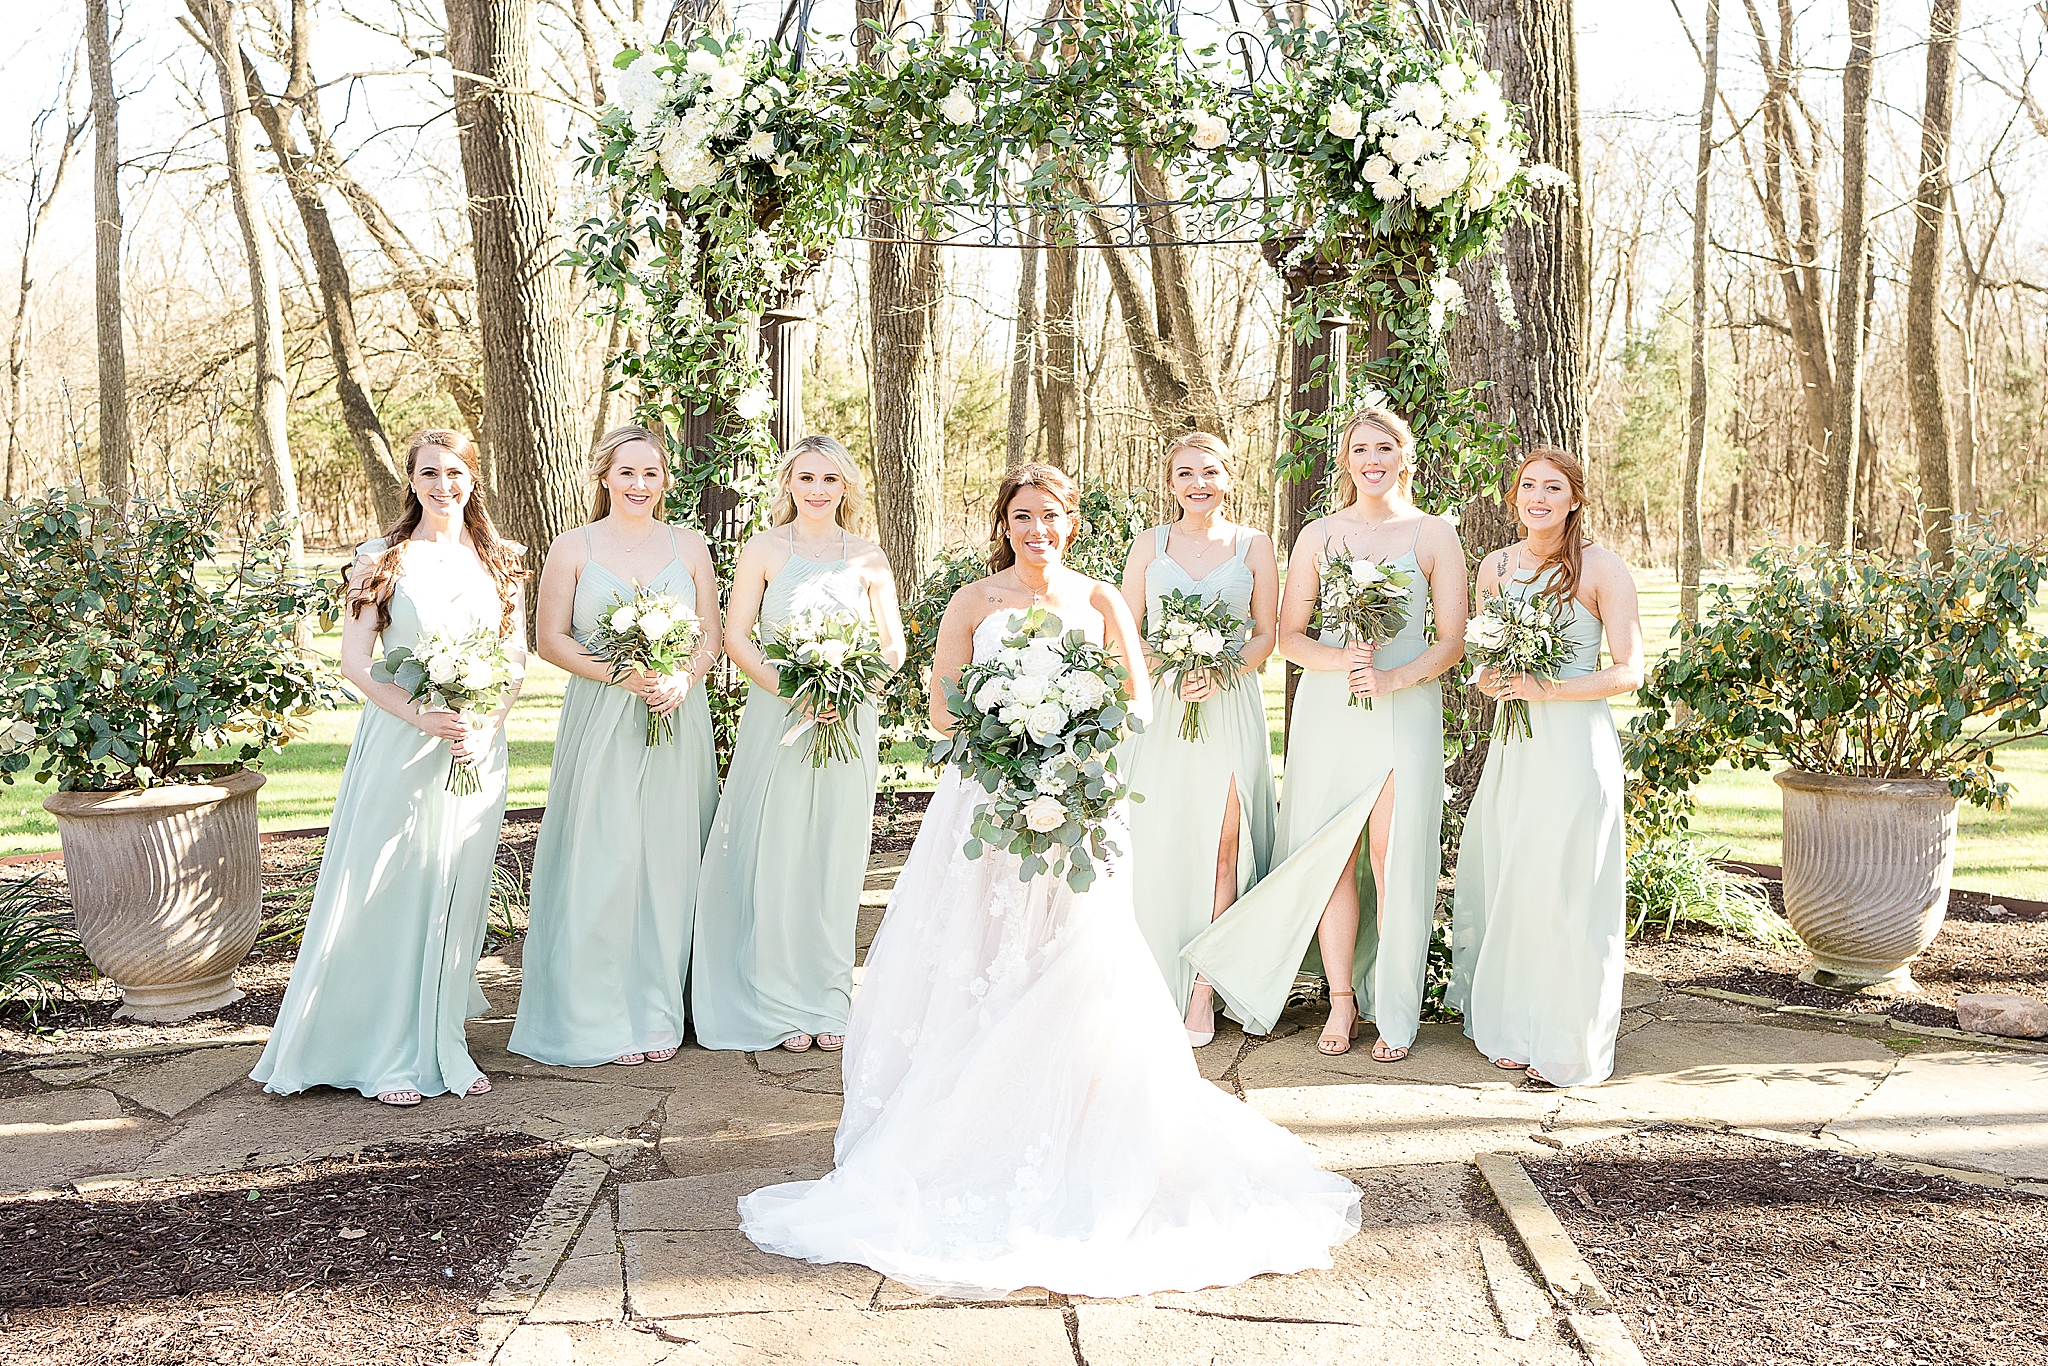 bridesmaids in teal green dresses pose with bride